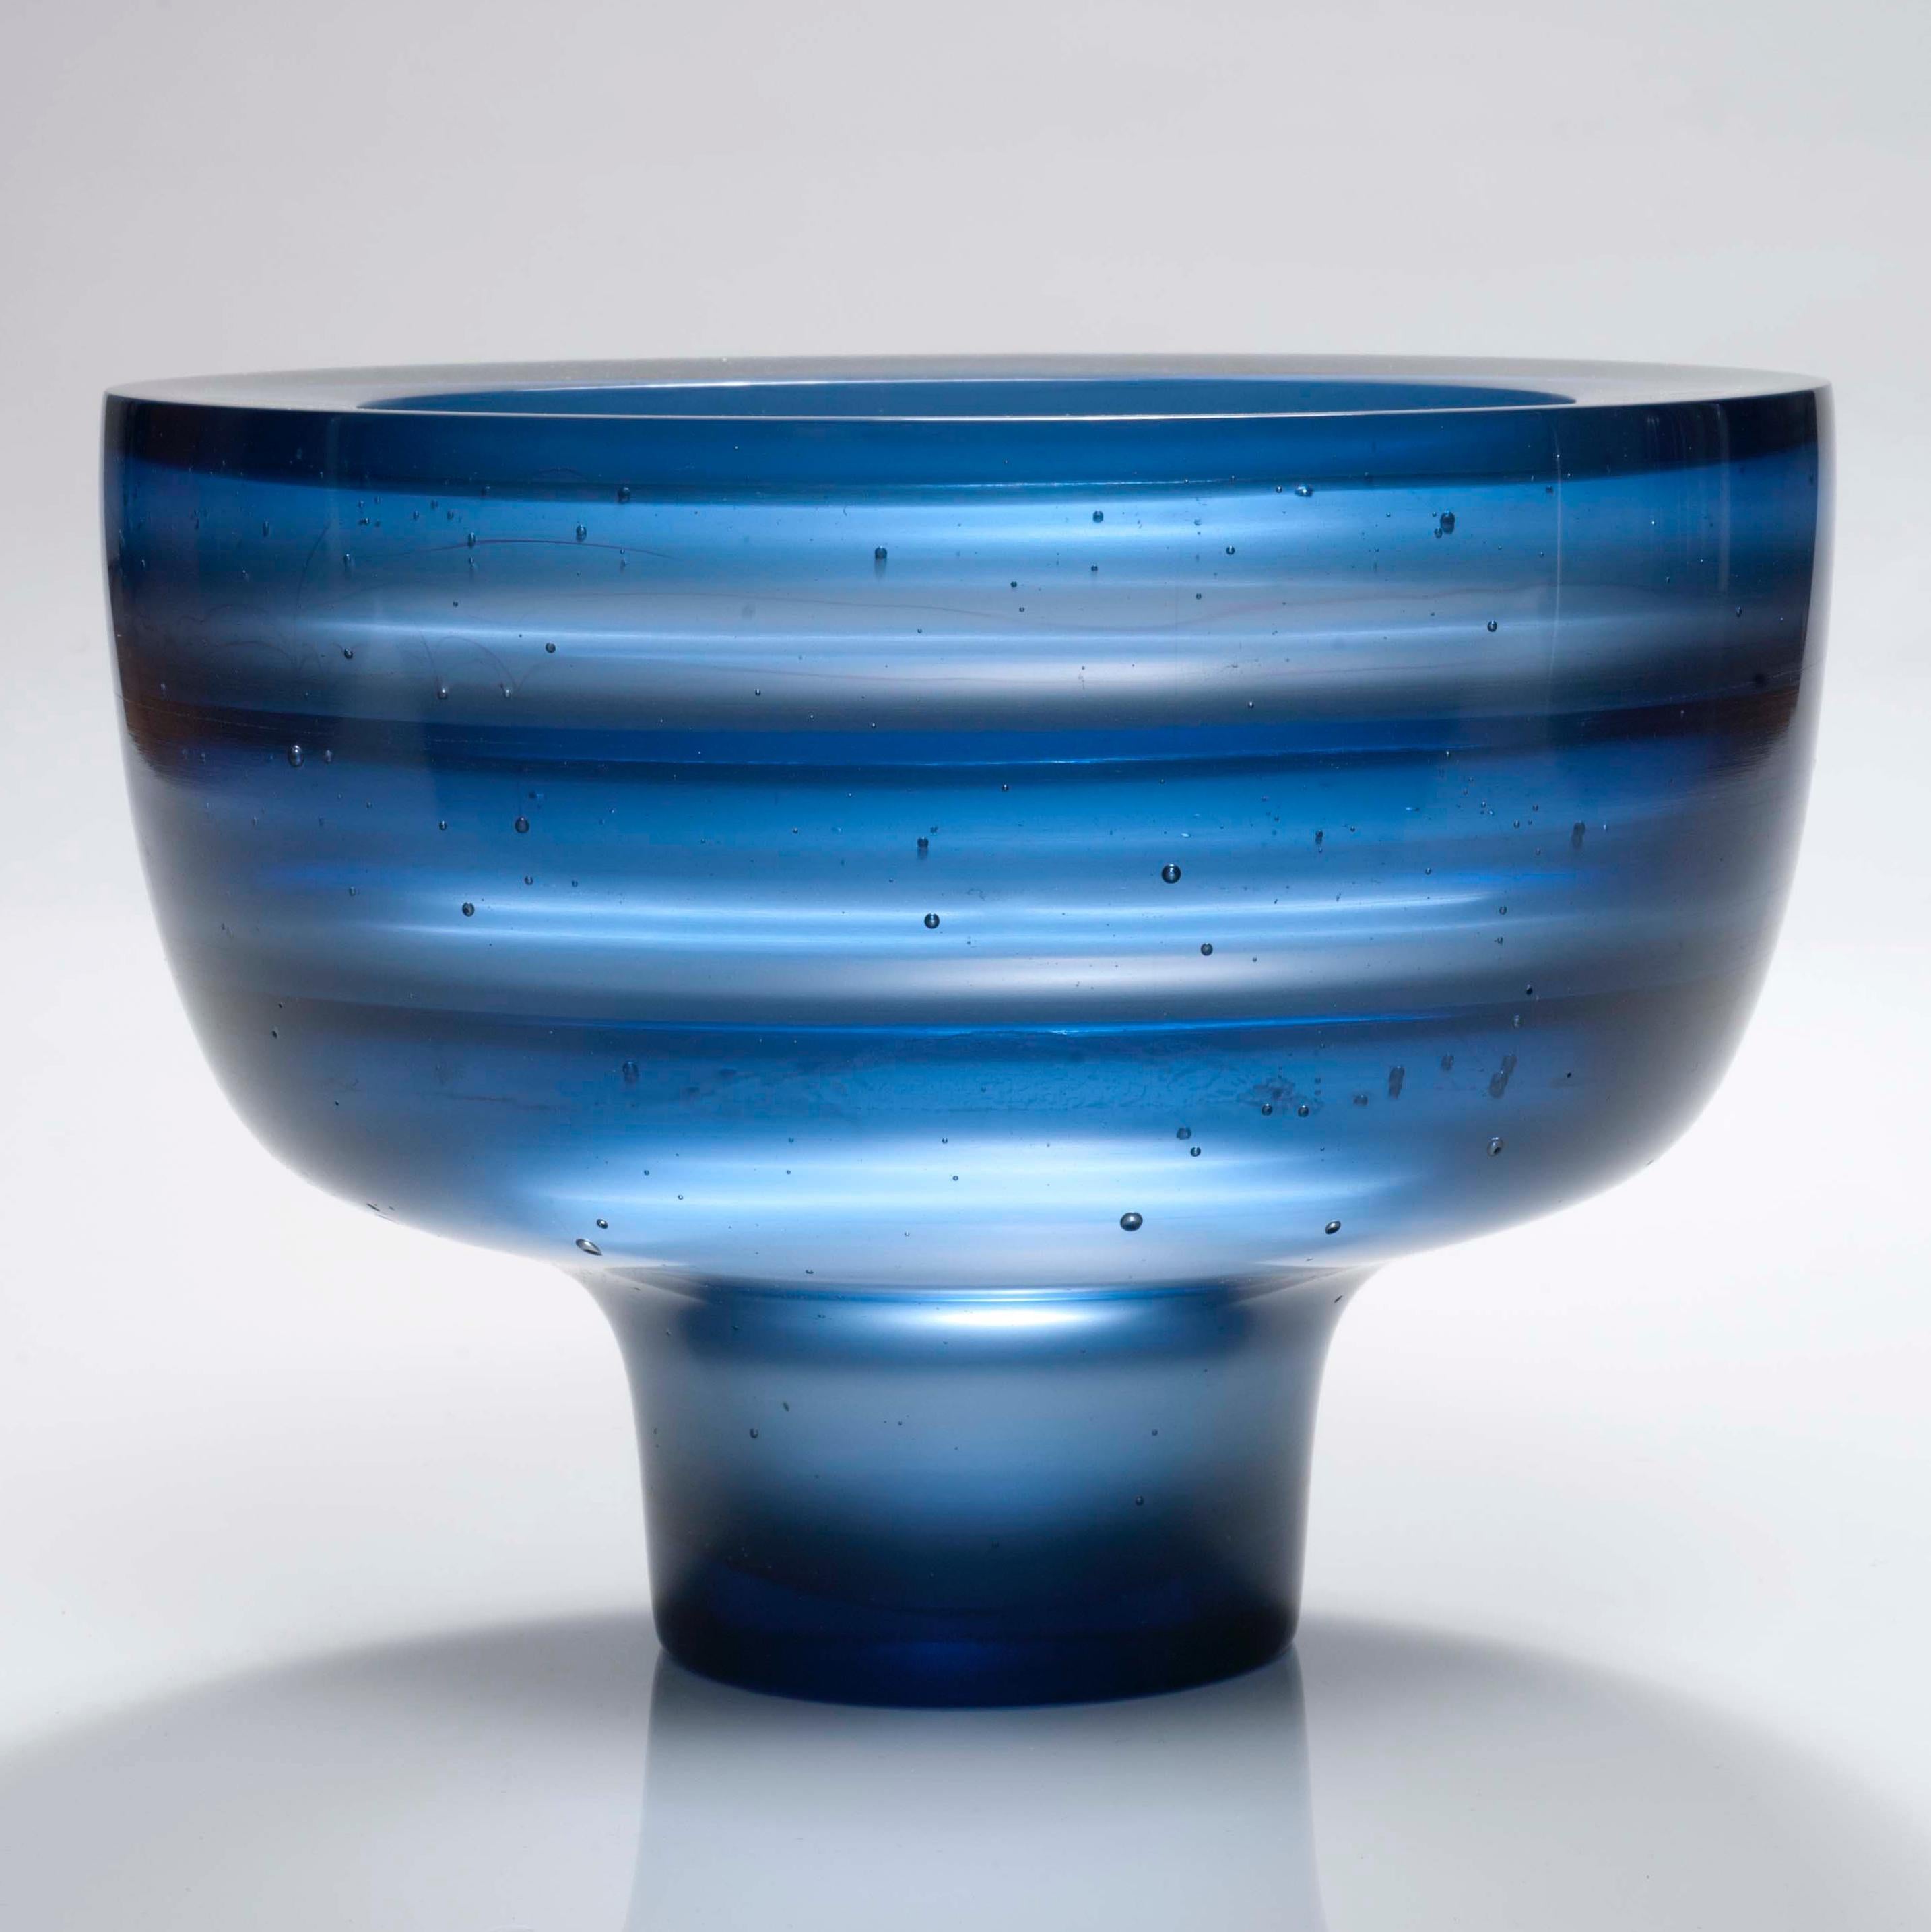 Somu is a cast glass artwork in a beautiful soft steel blue by the British artist Paul Stopler. With a smooth exterior, the interior is stepped into four sections by three ridged protruding 